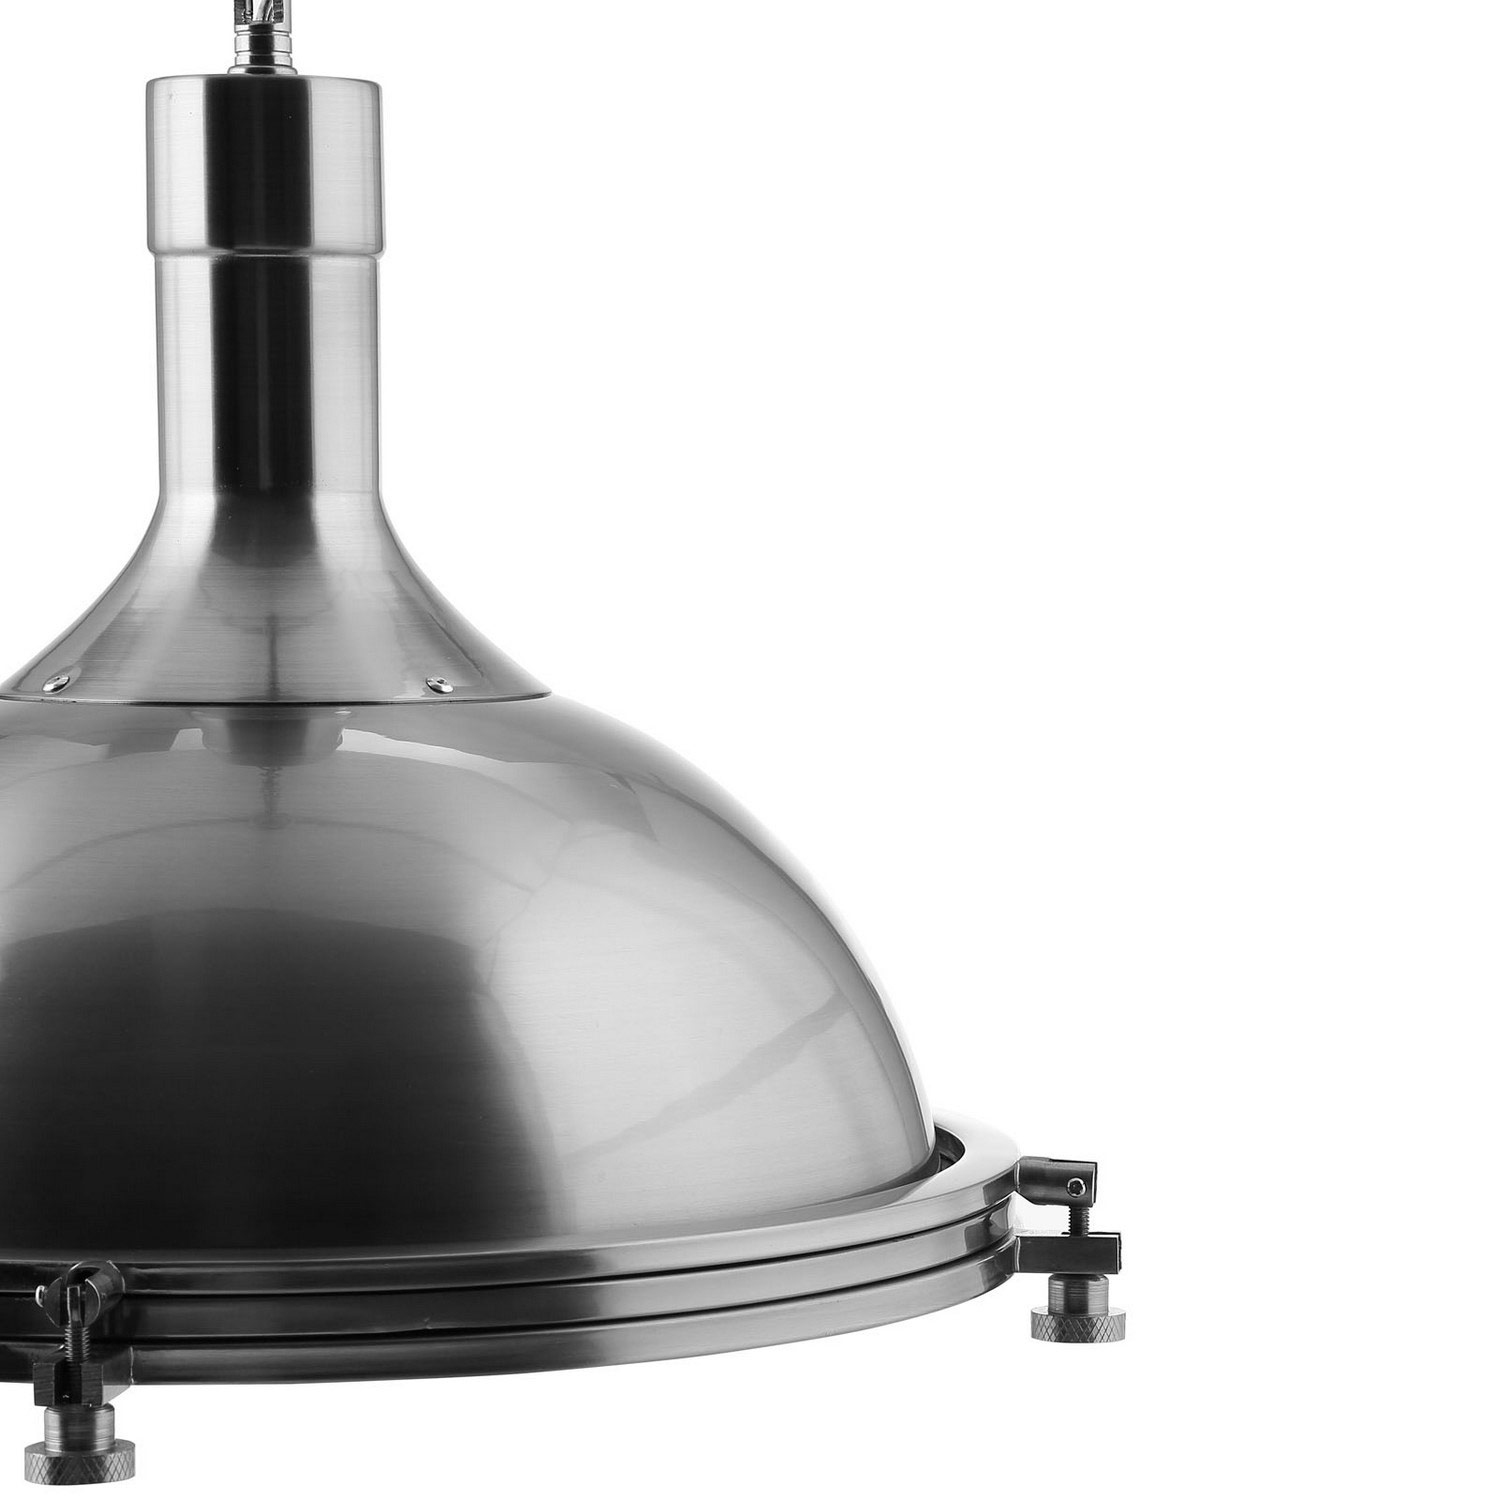 Modway Kettle Ceiling Fixture - Silver